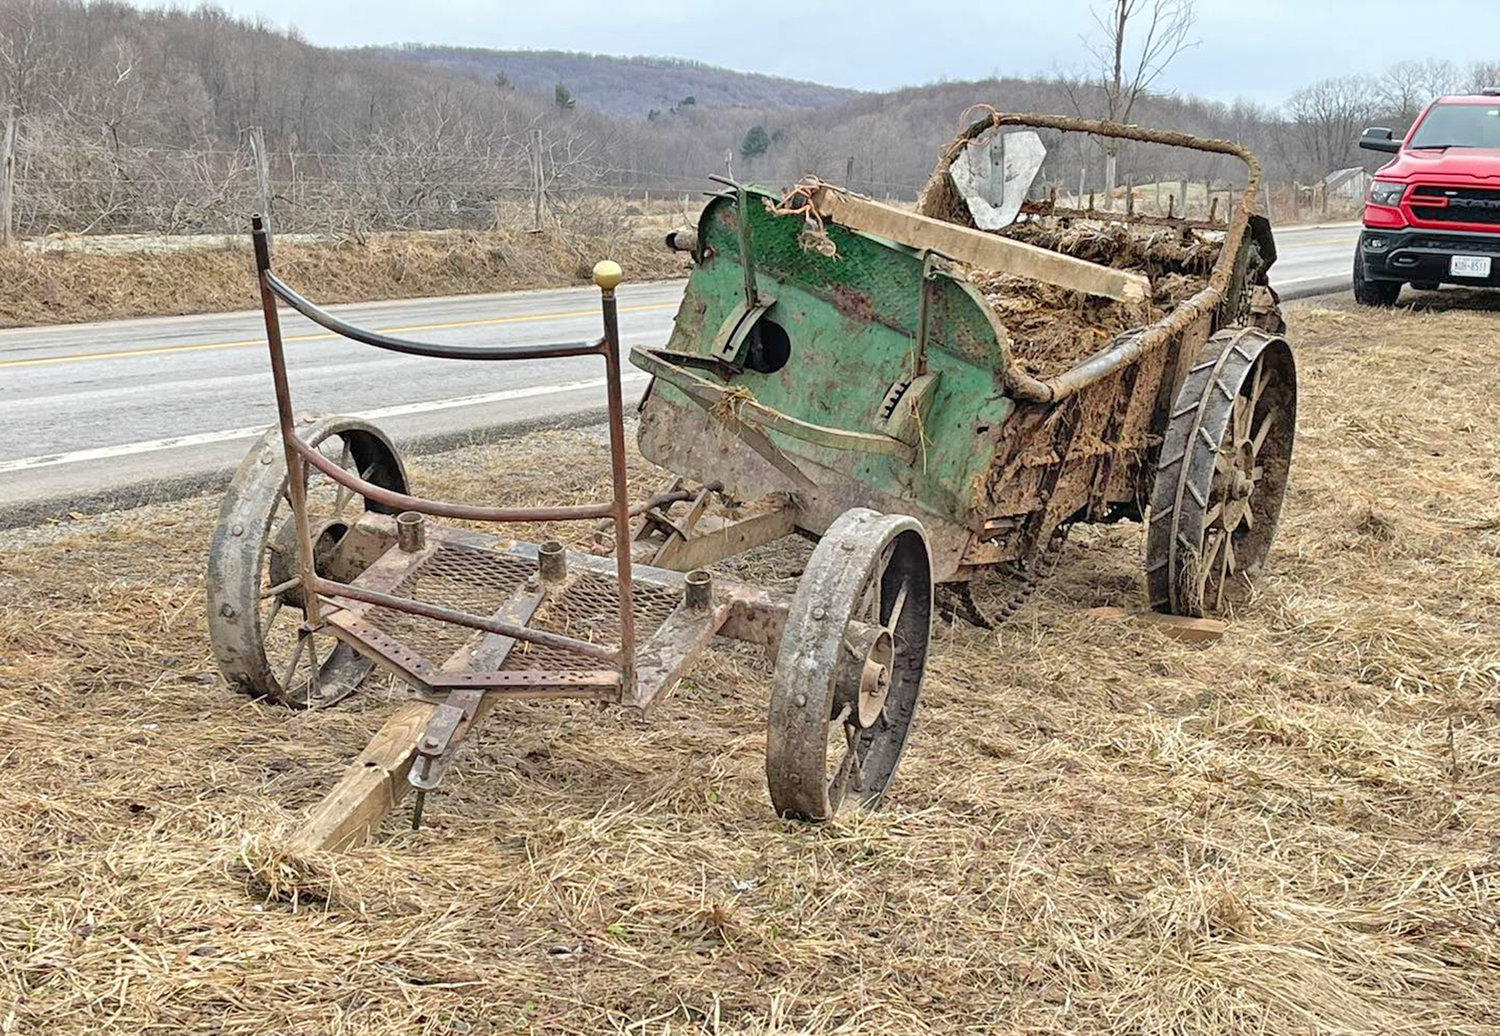 This Amish manure spreader was damaged, and it's driver hospitalized, after being struck by a Jeep on Route 274 in Western Saturday afternoon, according to the Western Fire Department.